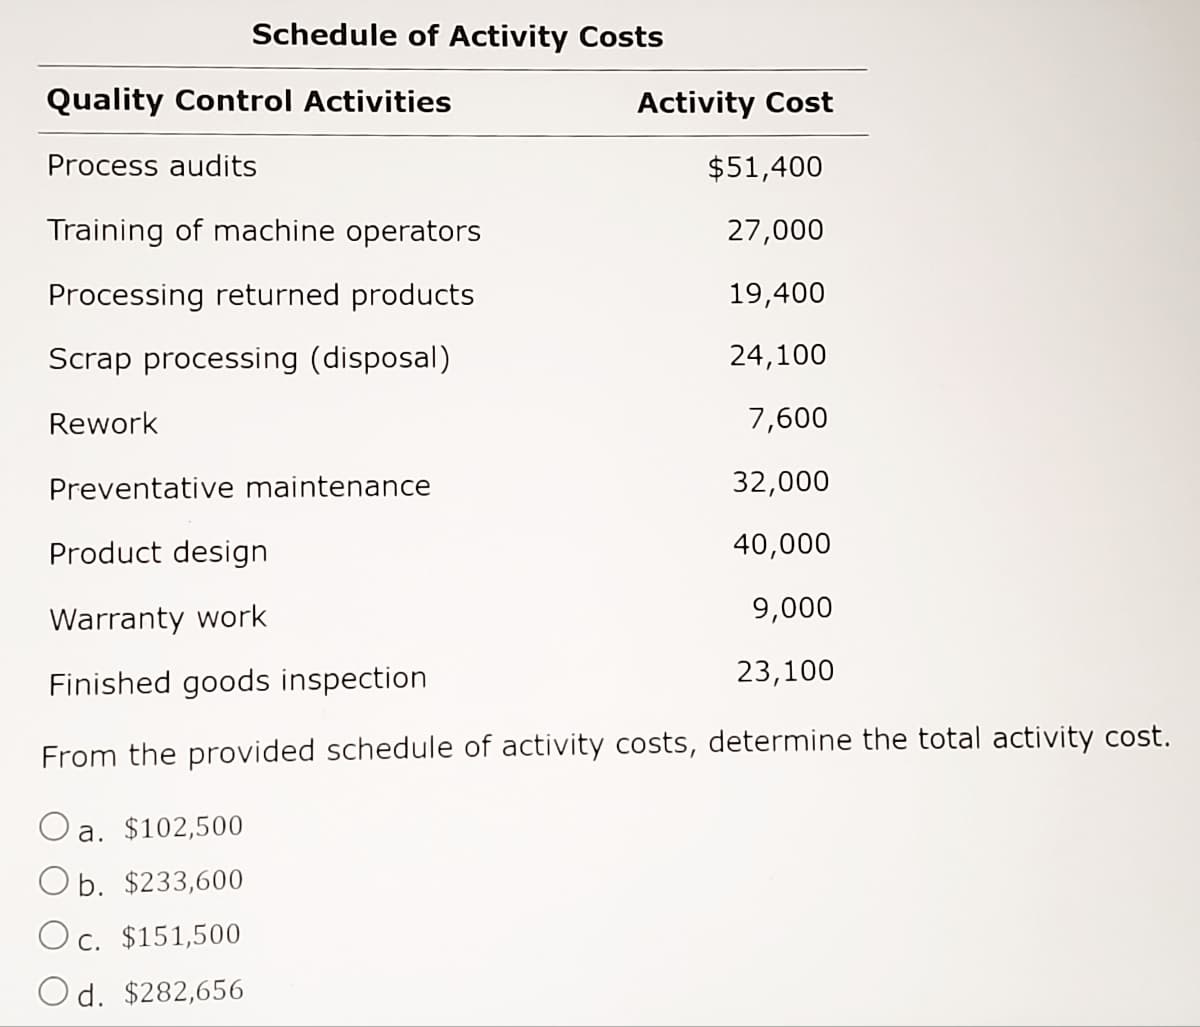 Schedule of Activity Costs
Quality Control Activities
Activity Cost
Process audits
$51,400
Training of machine operators
27,000
Processing returned products
19,400
Scrap processing (disposal)
24,100
Rework
7,600
Preventative maintenance
32,000
Product design
40,000
Warranty work
9,000
Finished goods inspection
23,100
From the provided schedule of activity costs, determine the total activity cost.
O a. $102,500
Ob. $233,600
Oc. $151,500
Od. $282,656